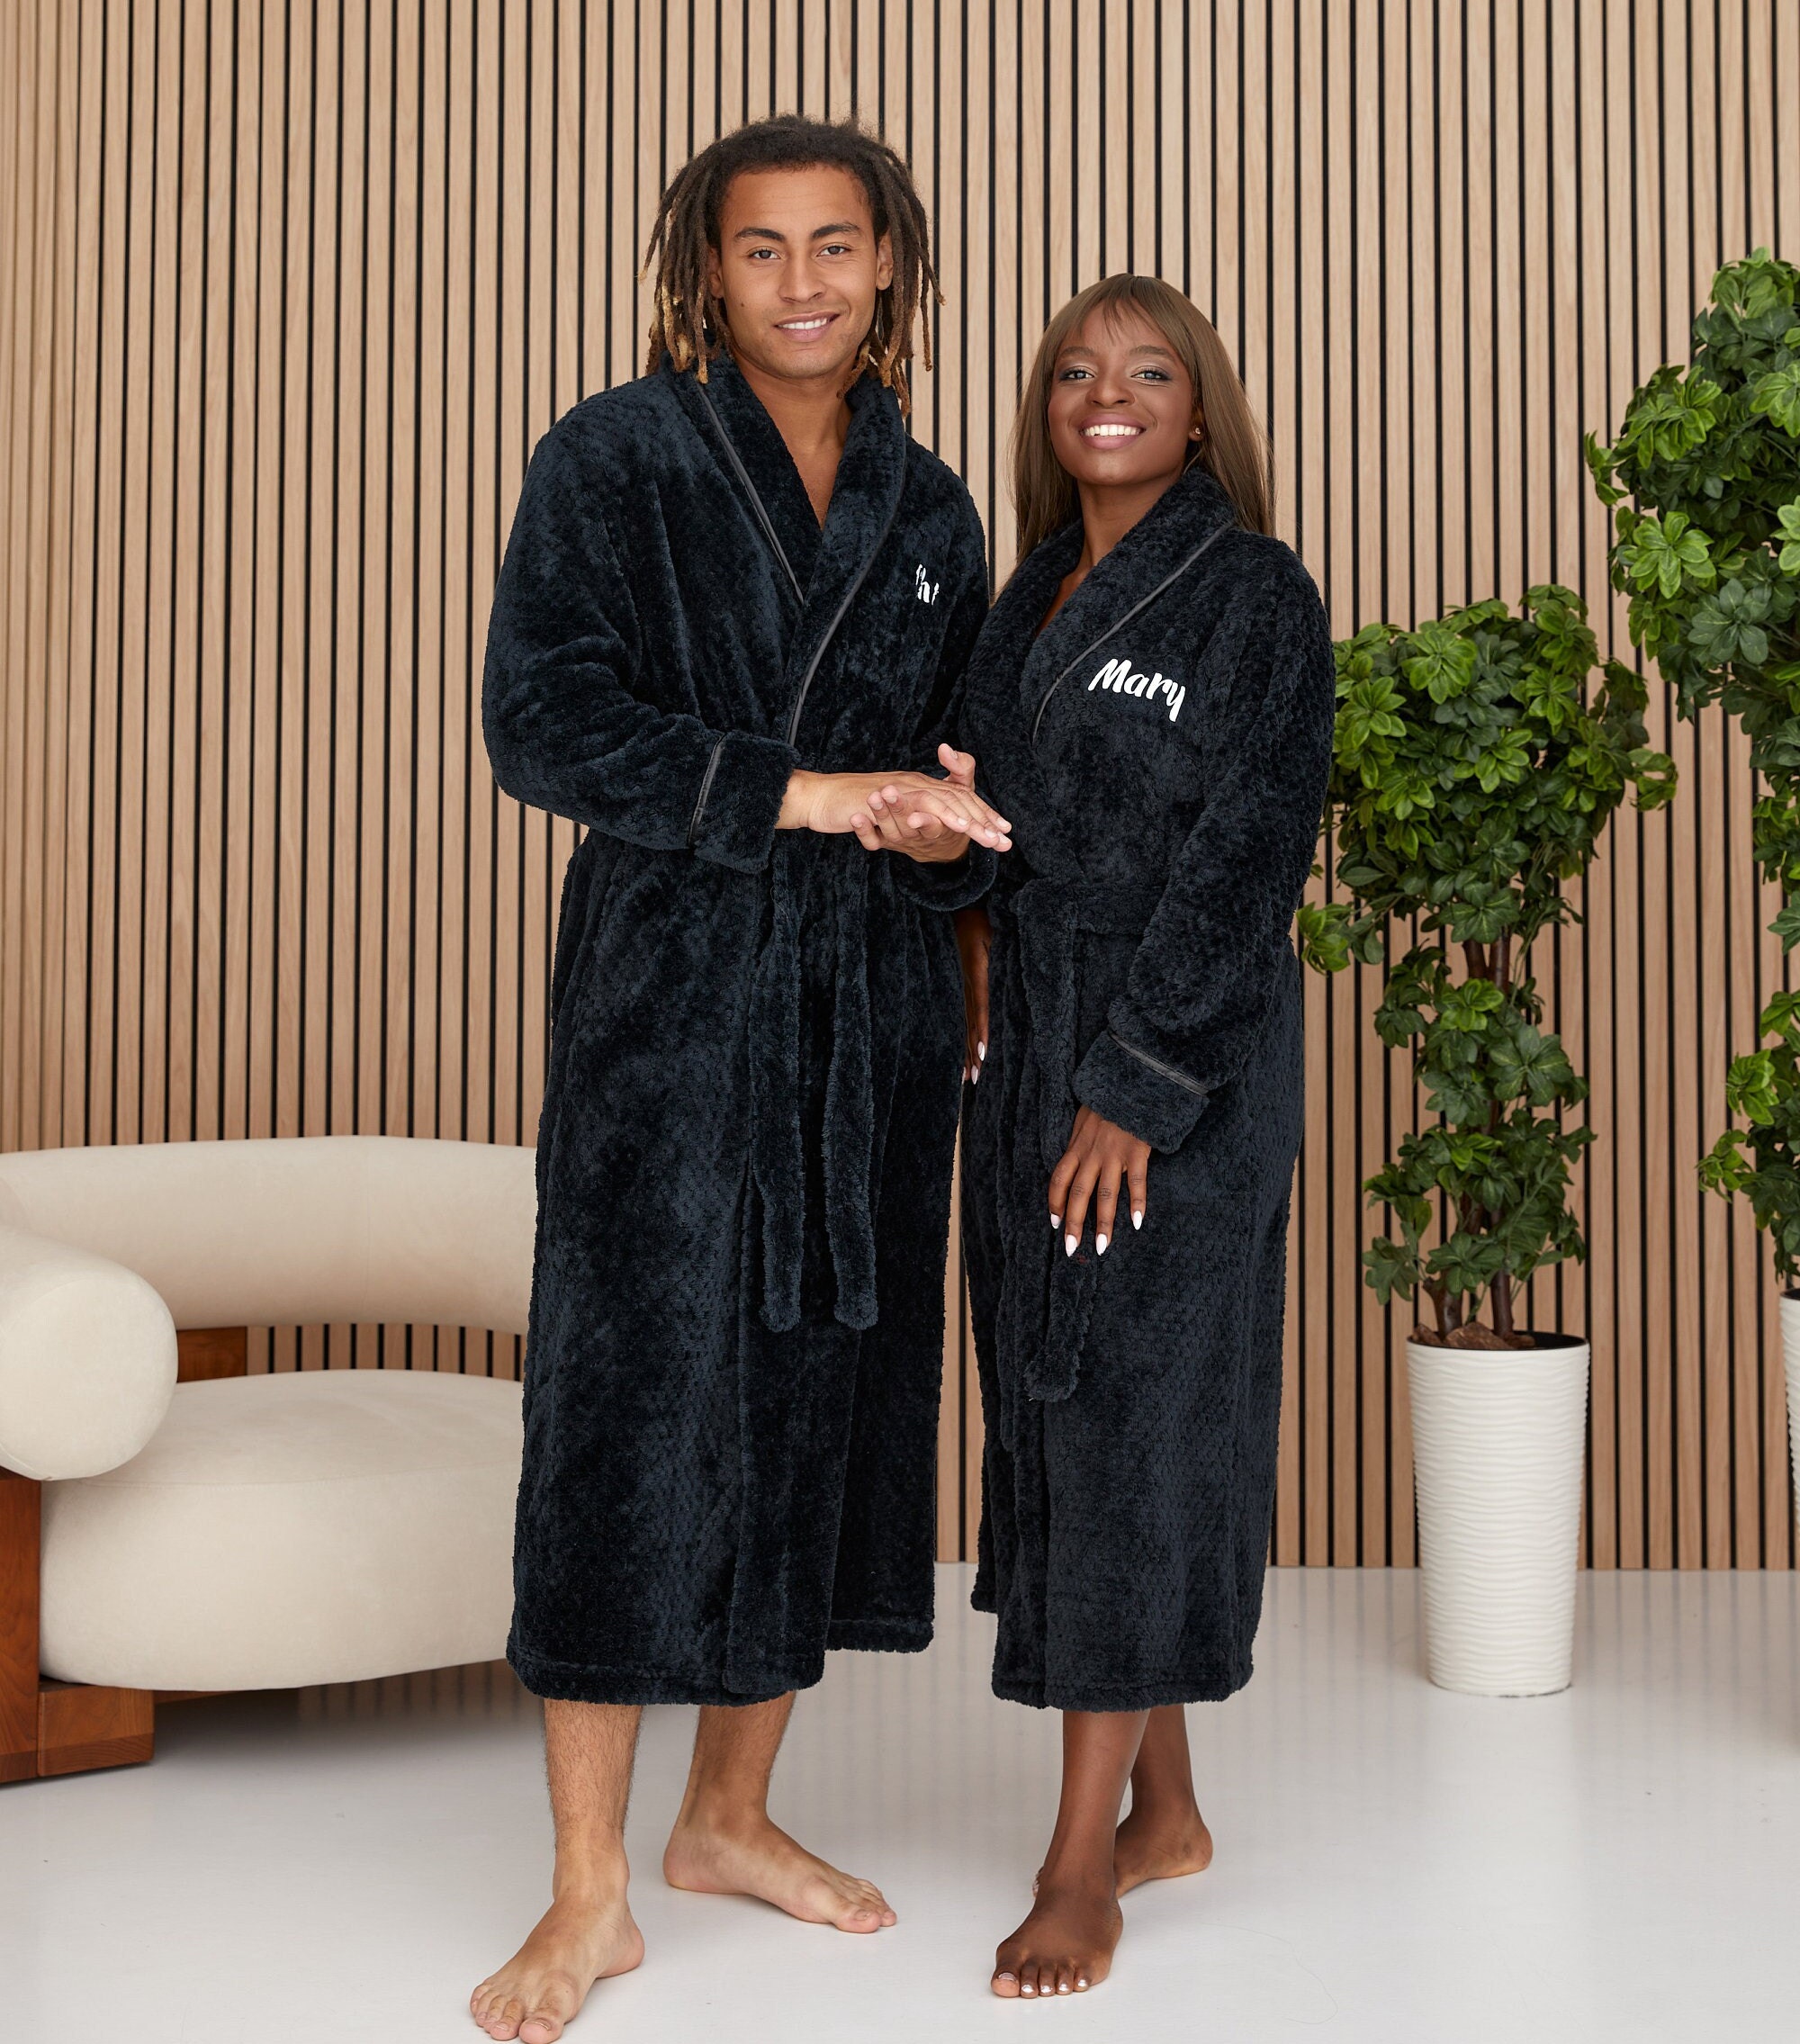 Mr and Mrs, Groom and Bride , His and Hers Satin Robes, Valentines